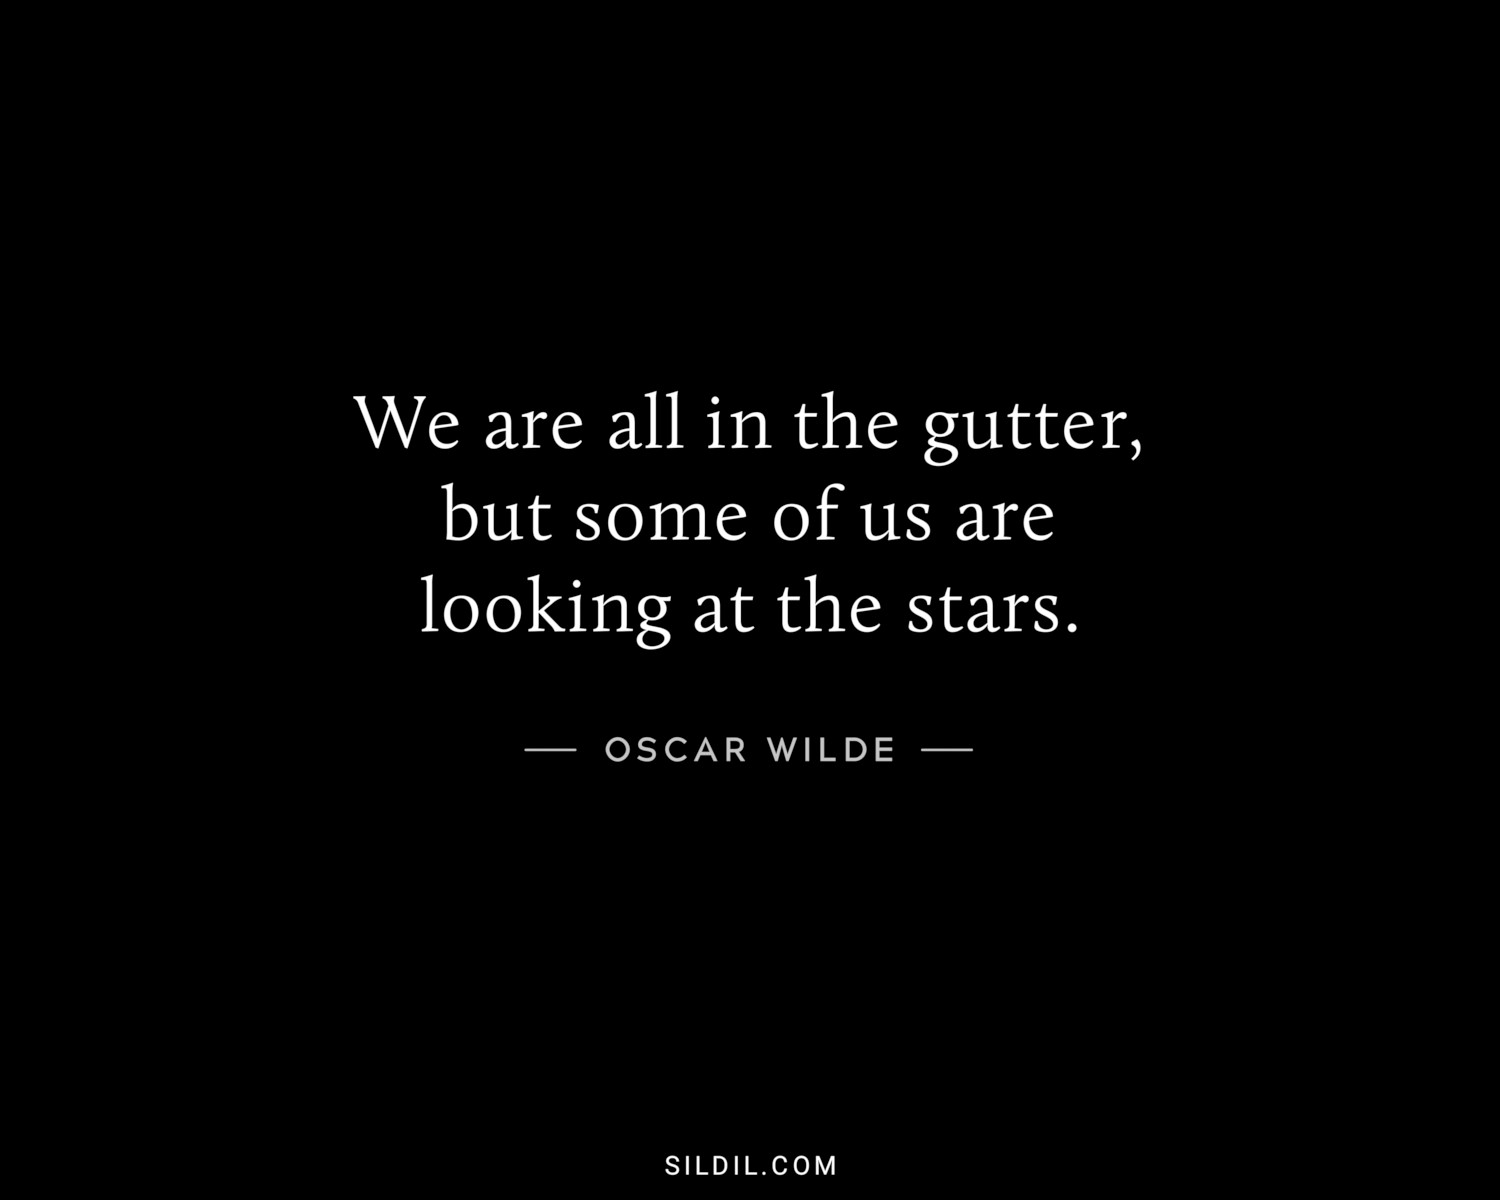 We are all in the gutter, but some of us are looking at the stars.